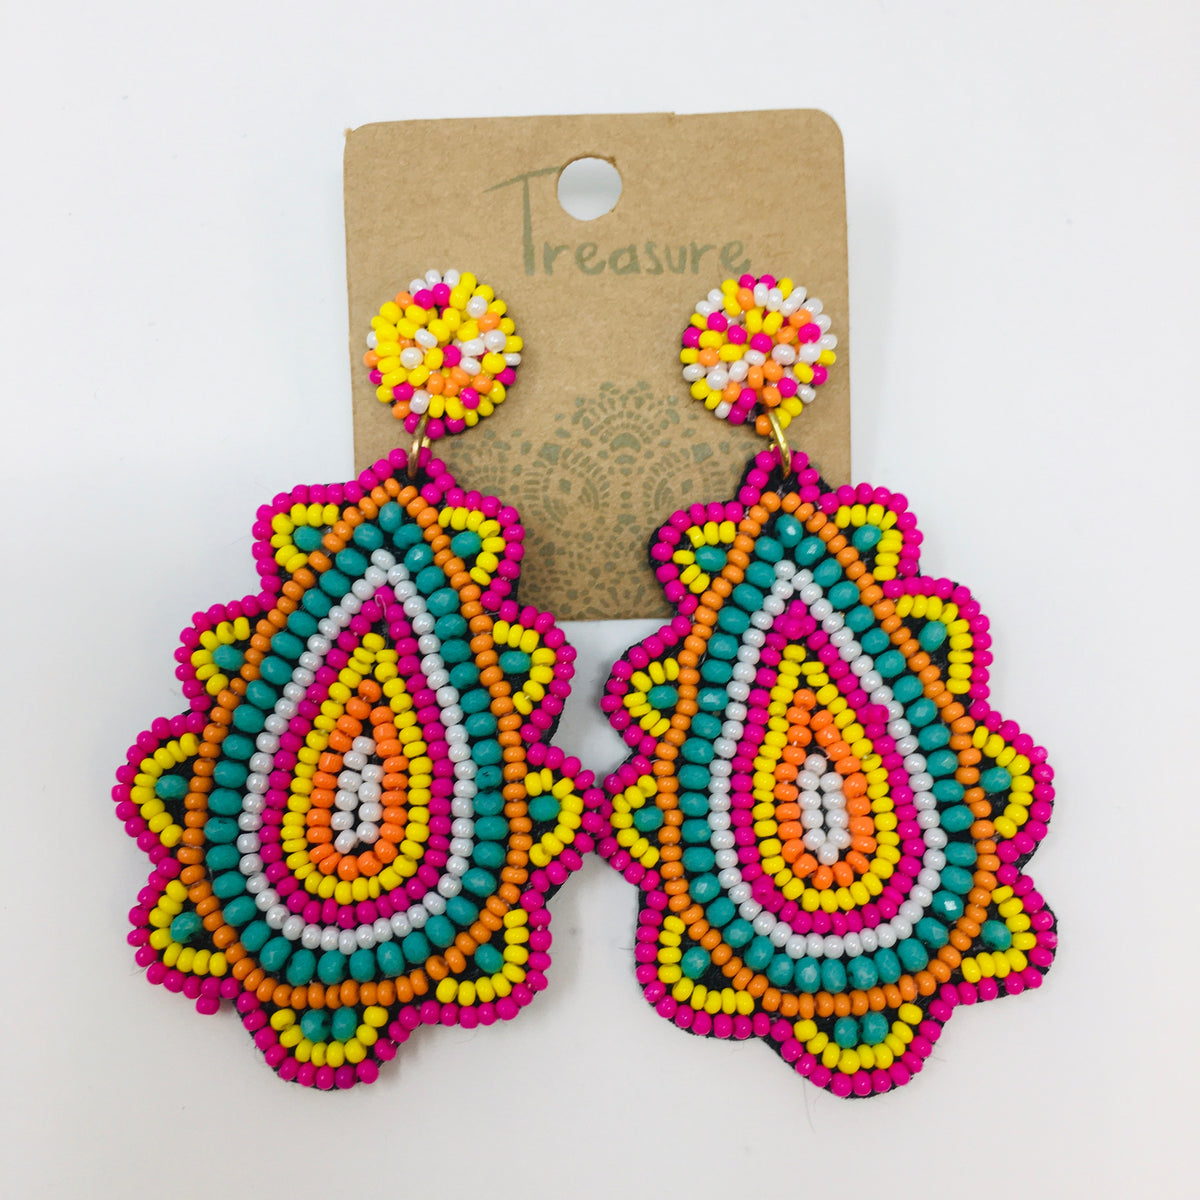 Scalloped teardrop shaped earrings with fuchsia, yellow, orange, turquoise &amp; white colored seed beads shown on white background